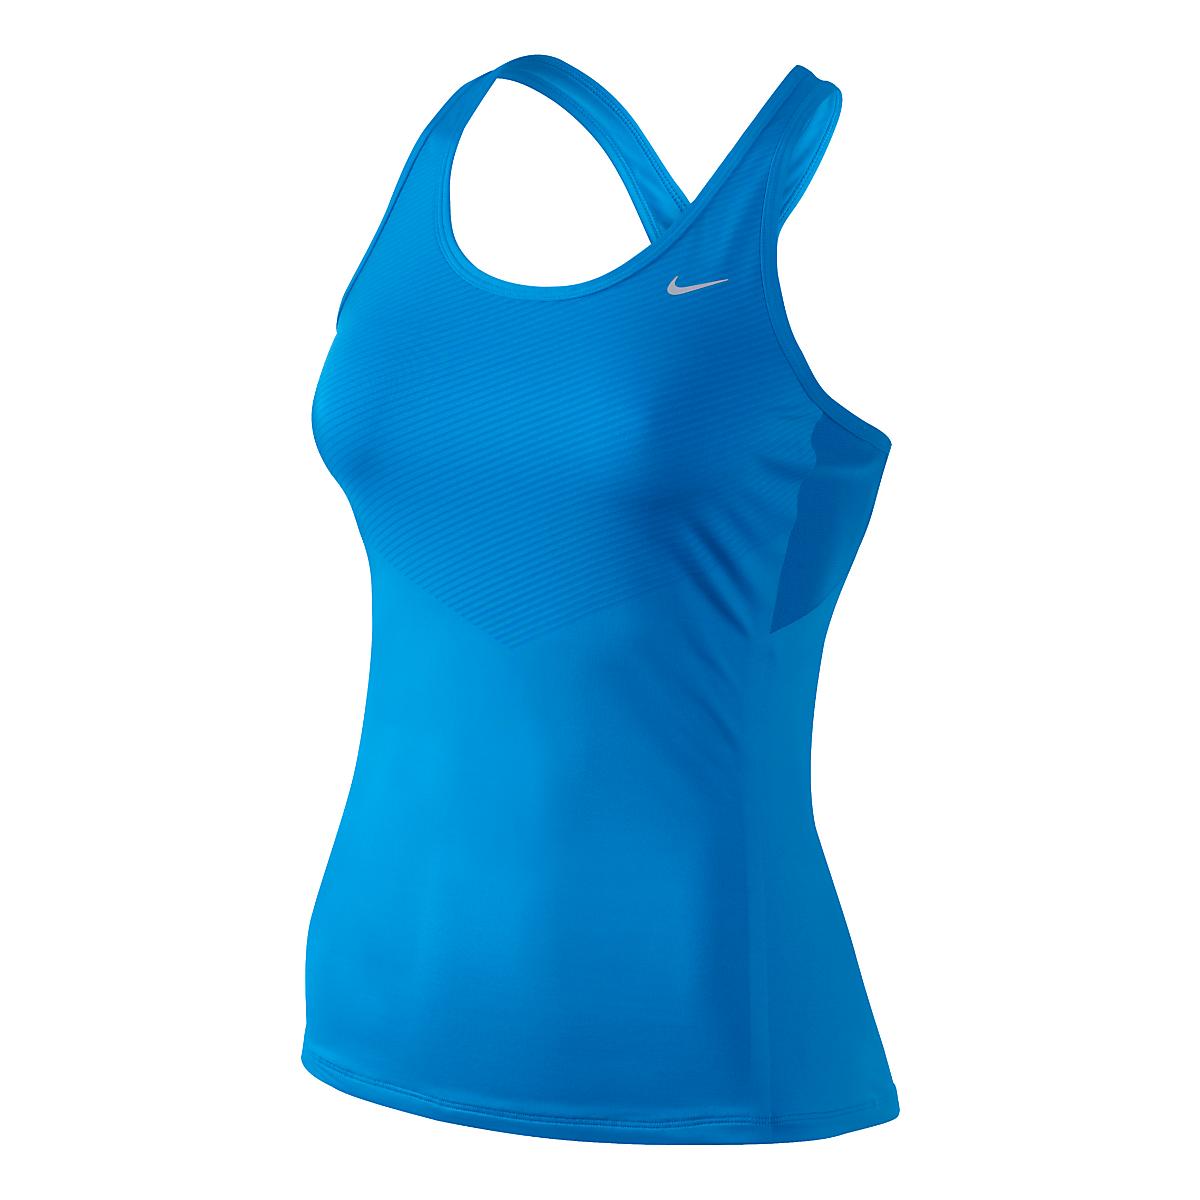 Womens Nike Speed Tank Technical Tops at Road Runner Sports